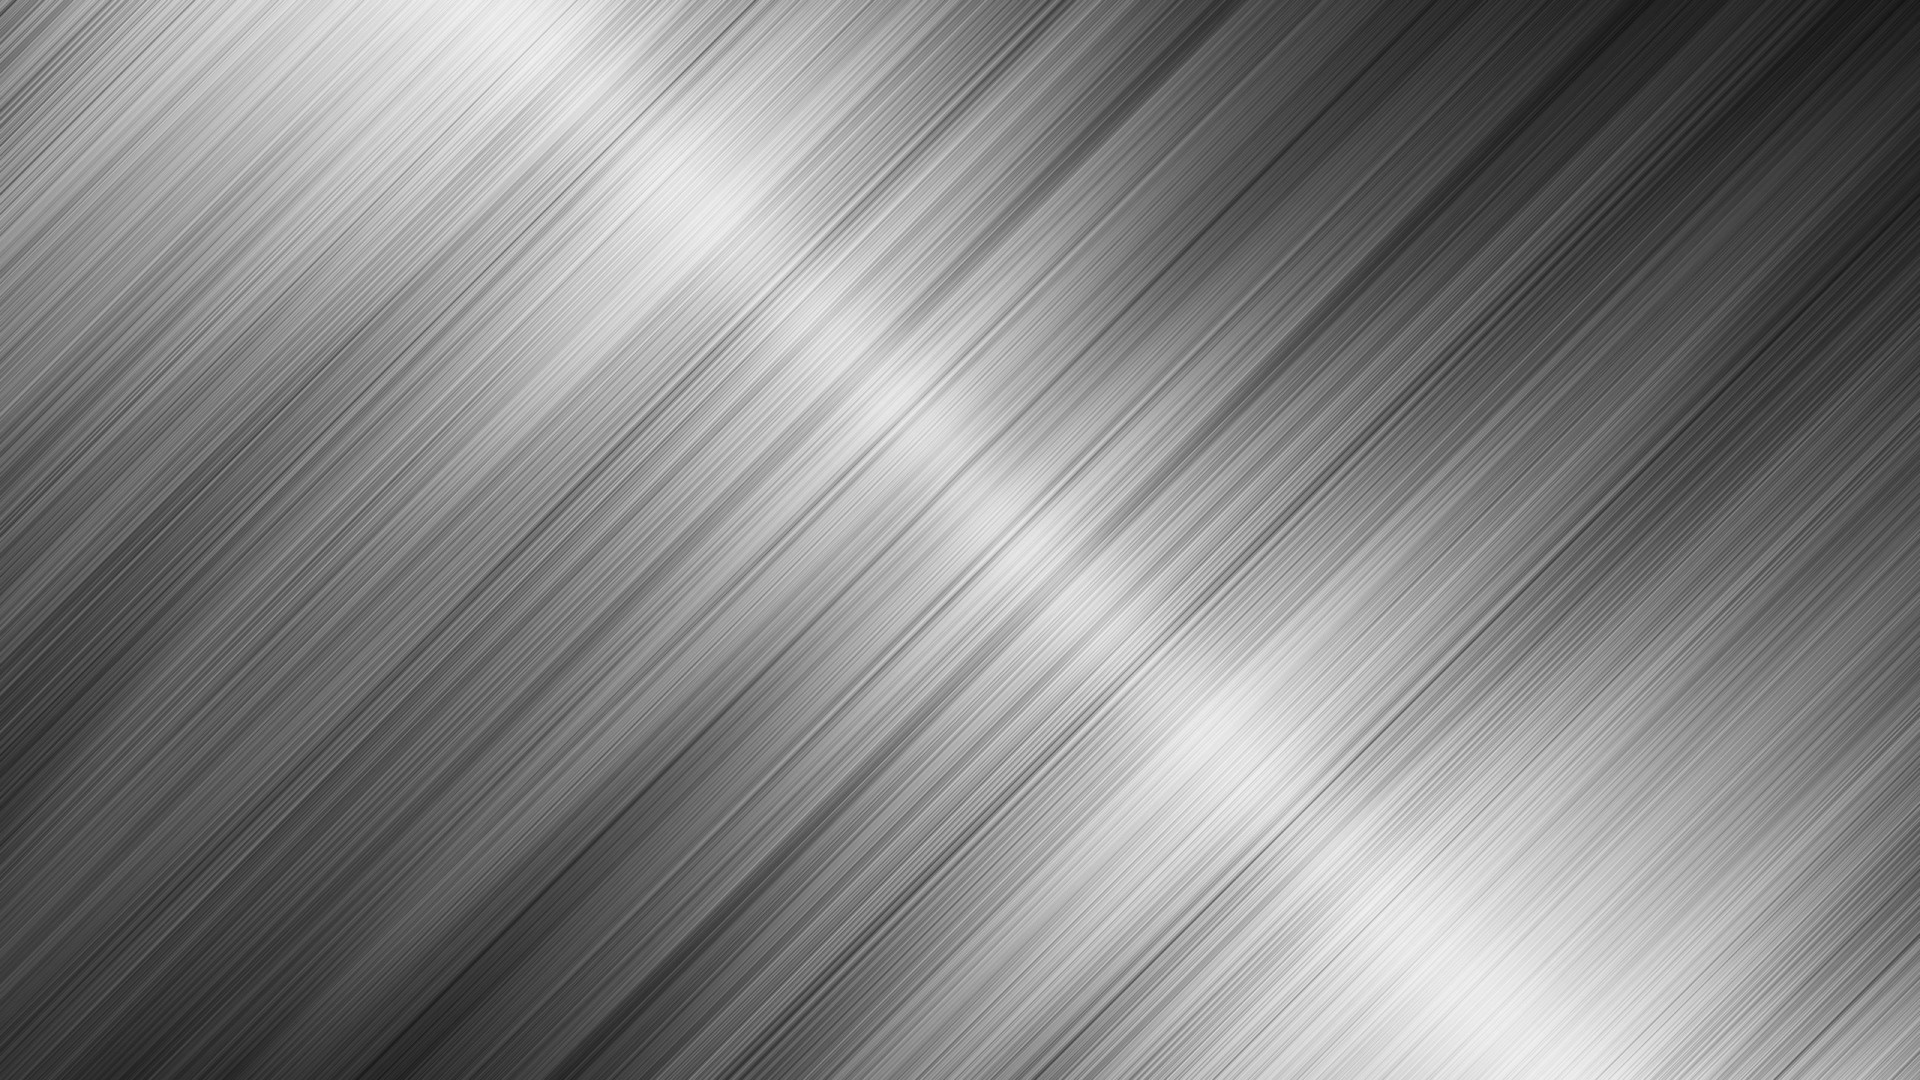 Metallic Wallpaper With Silver Image